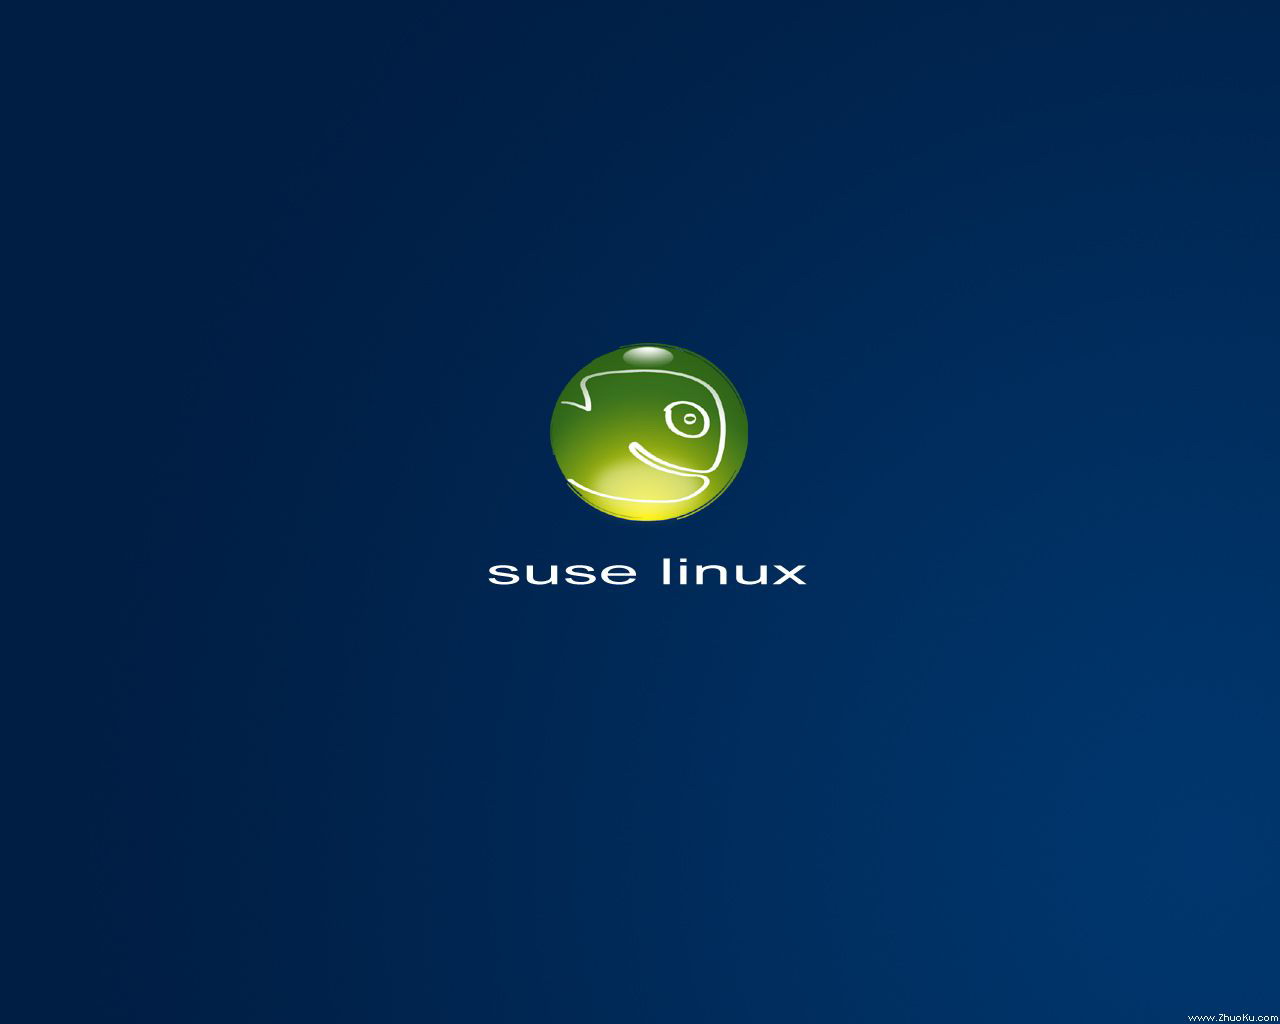 suse linux ֽ 1024*768 1280*1024 1600*1200(ֽ13)